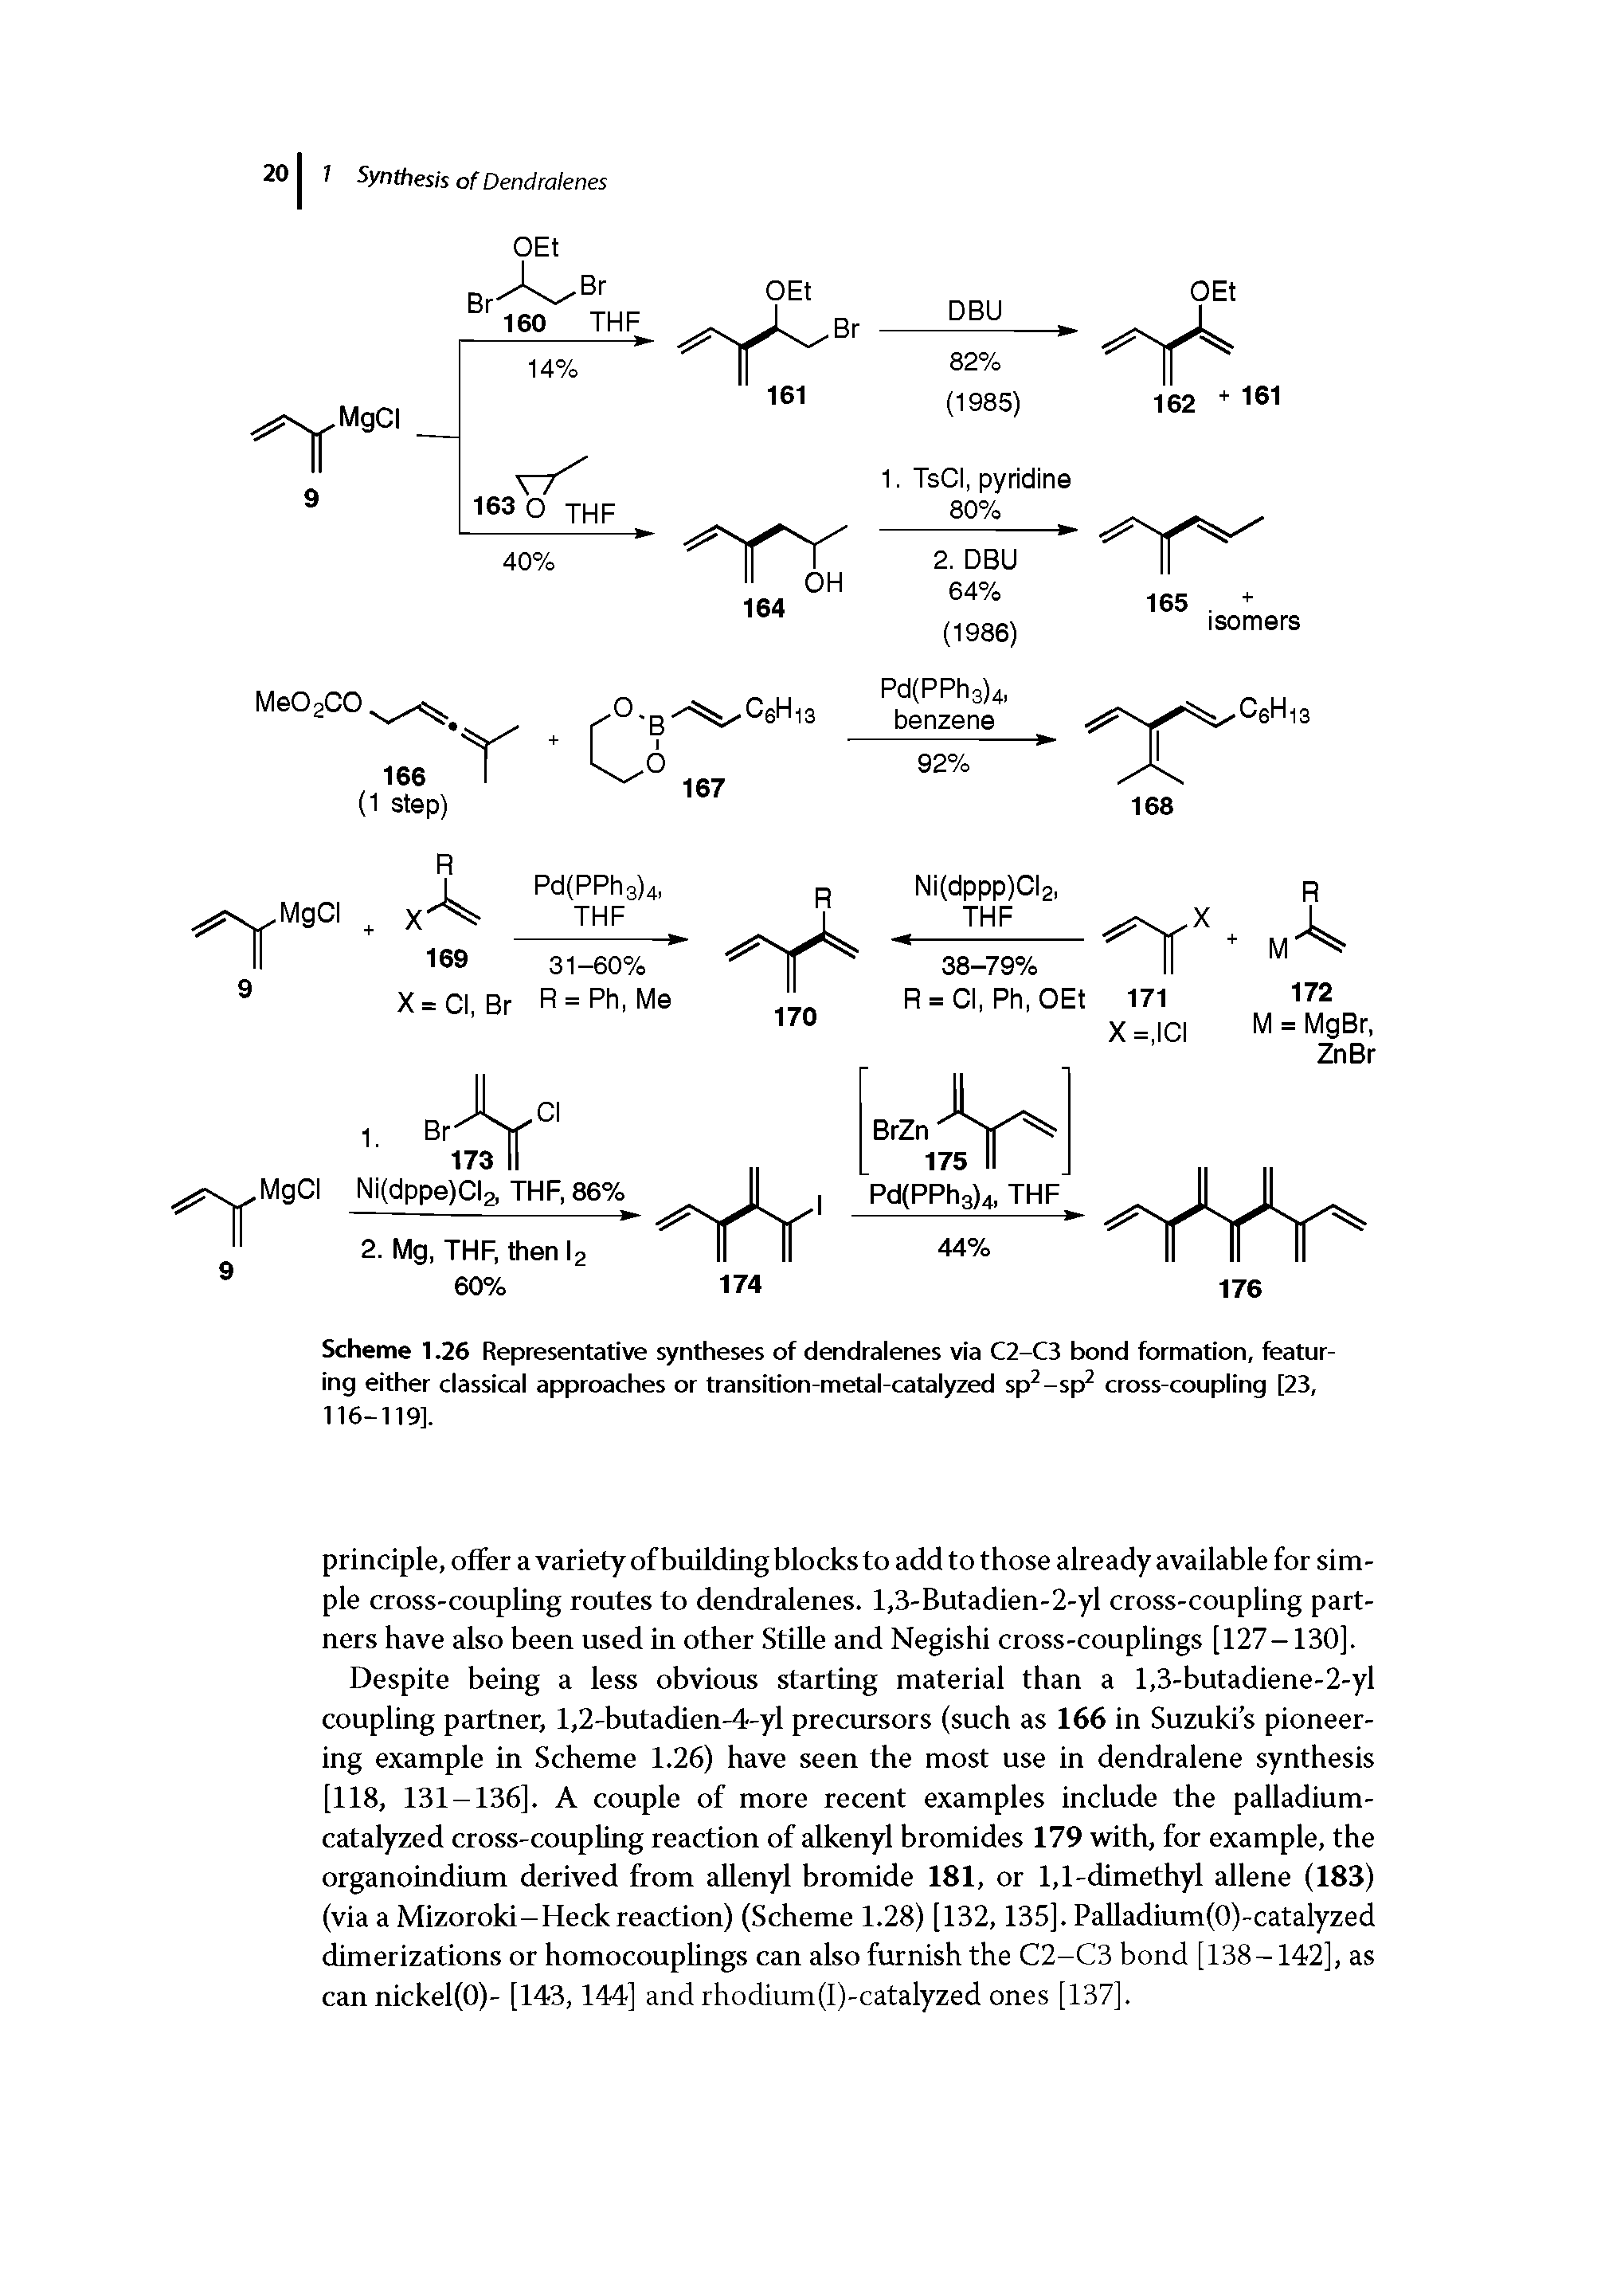 Scheme 1.26 Representative syntheses of dendralenes via C2-C3 bond formation, featuring either classical approaches or transition-metal-catalyzed sp -sp cross-coupling [23, 116-119].